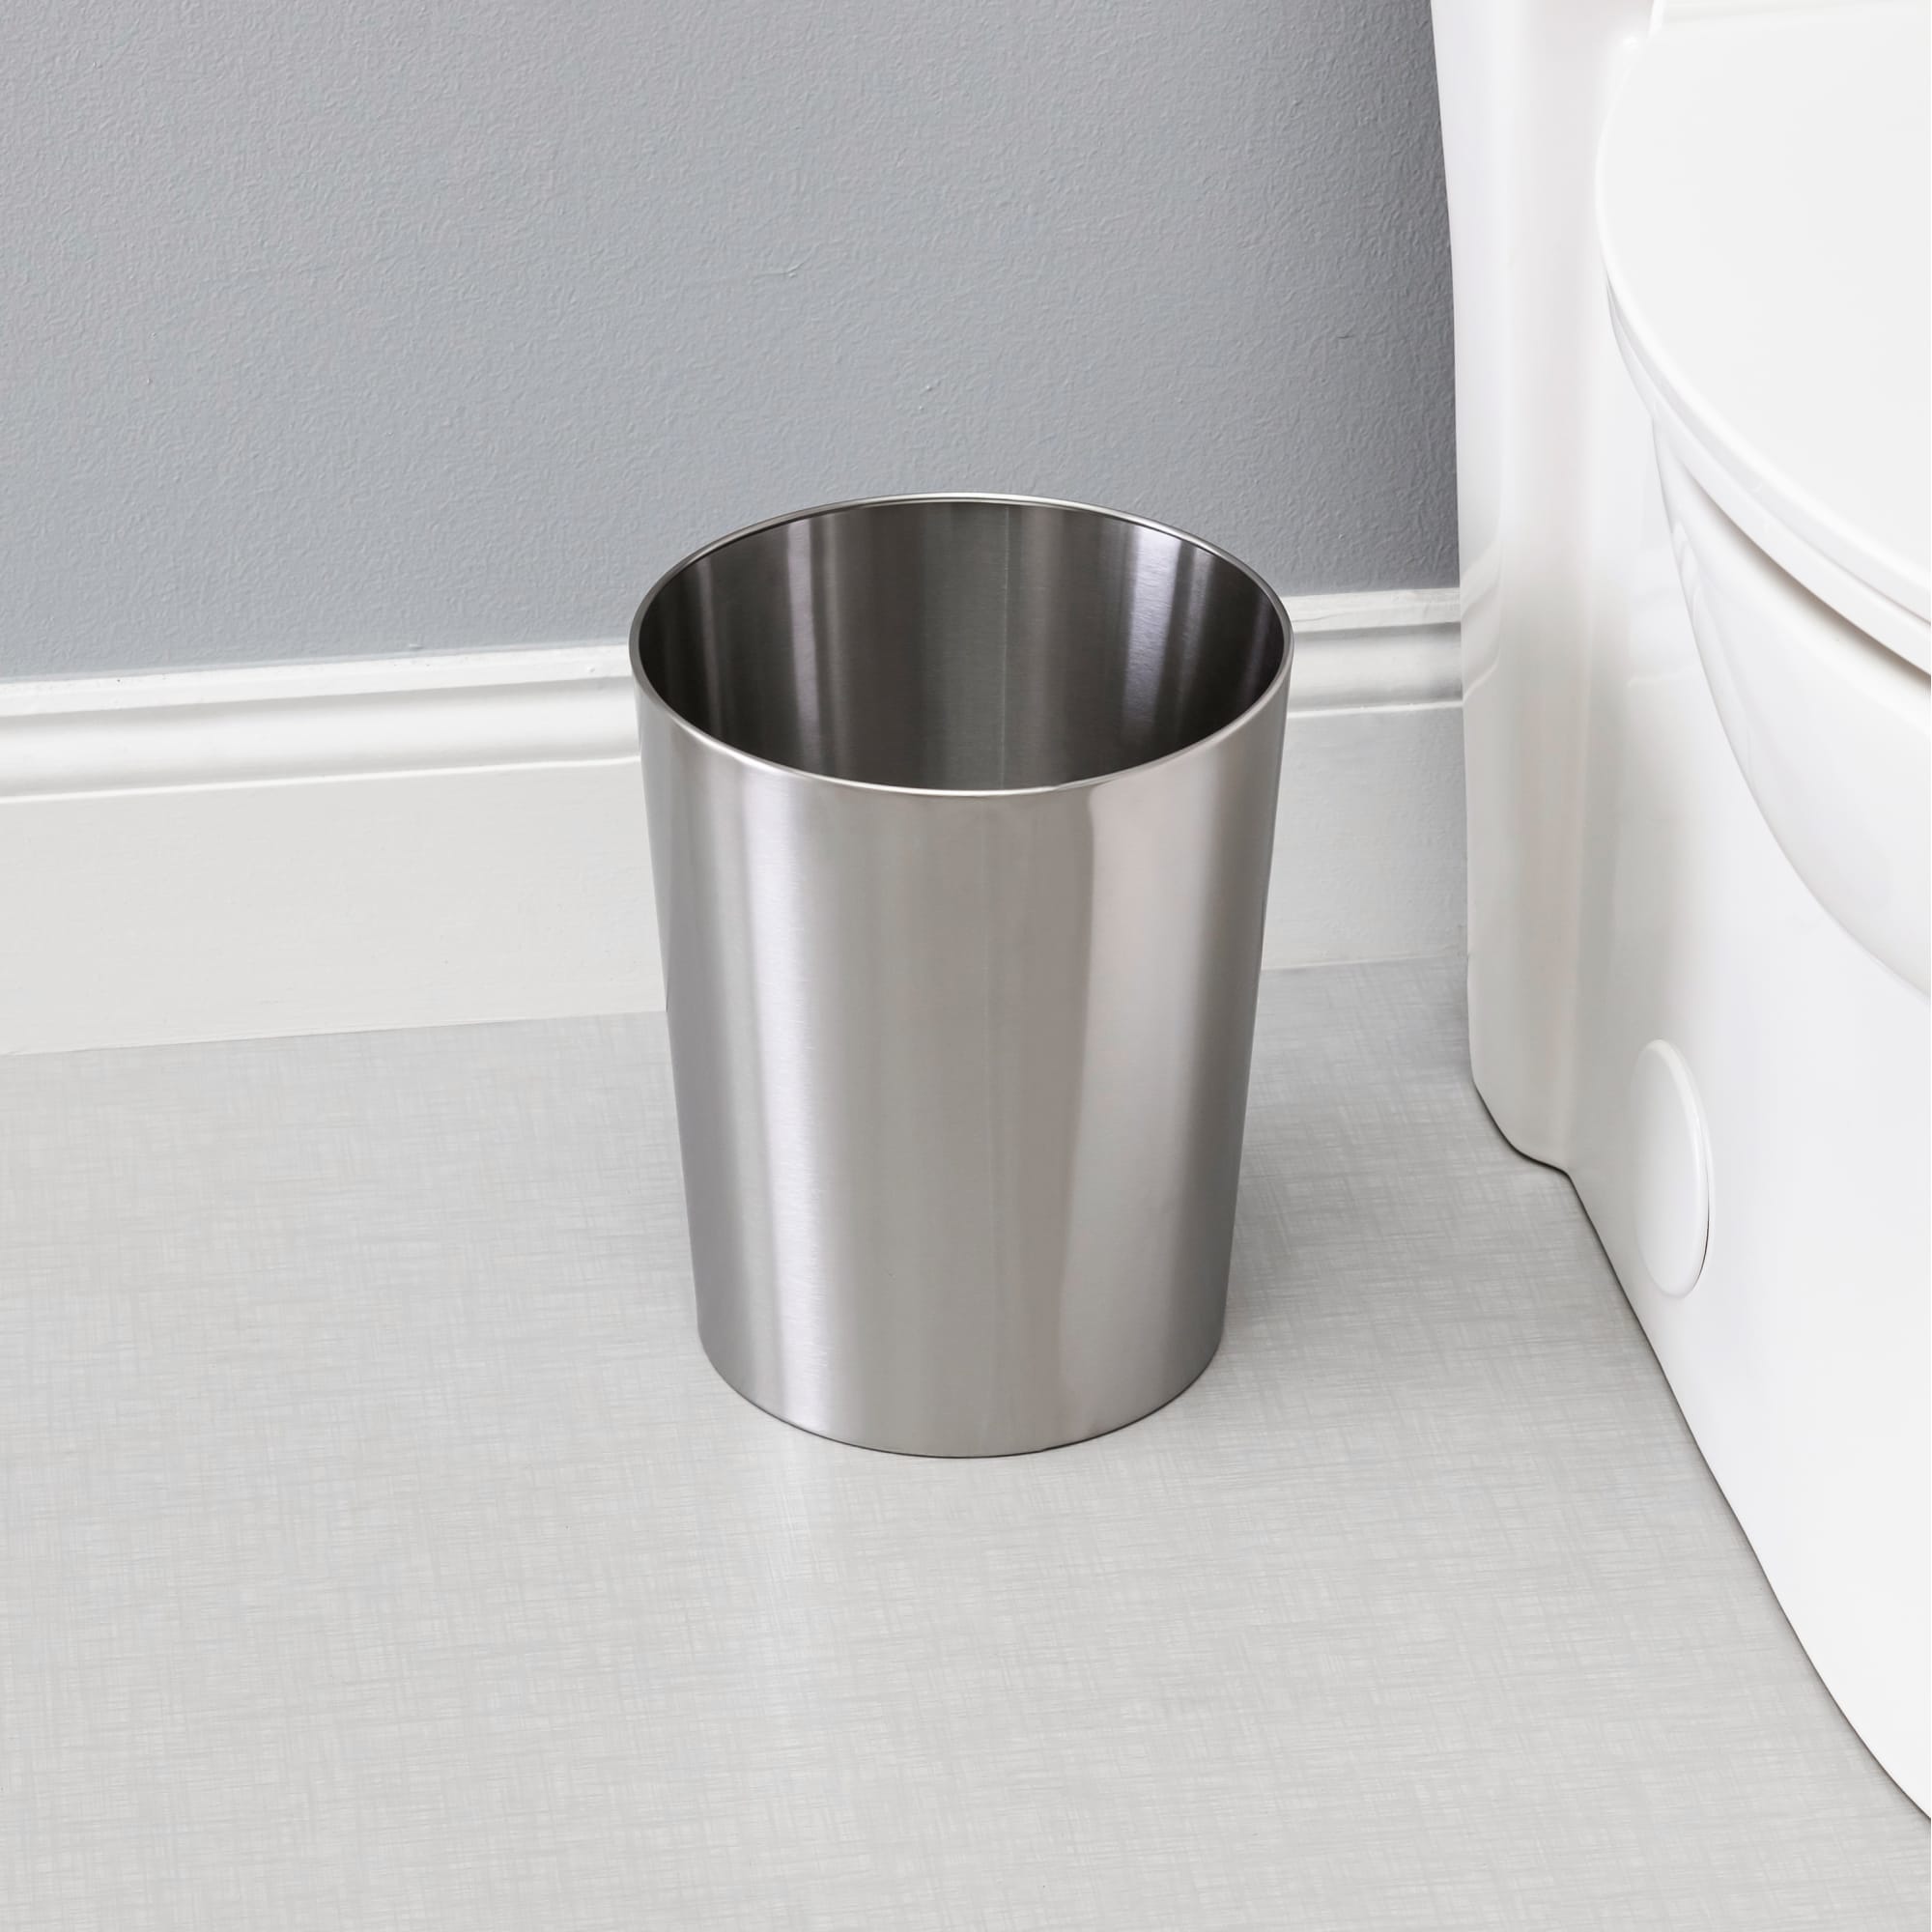 Home Basics Tapered 6 Lt Stainless Steel Waste Bin, Silver $6 EACH, CASE PACK OF 6